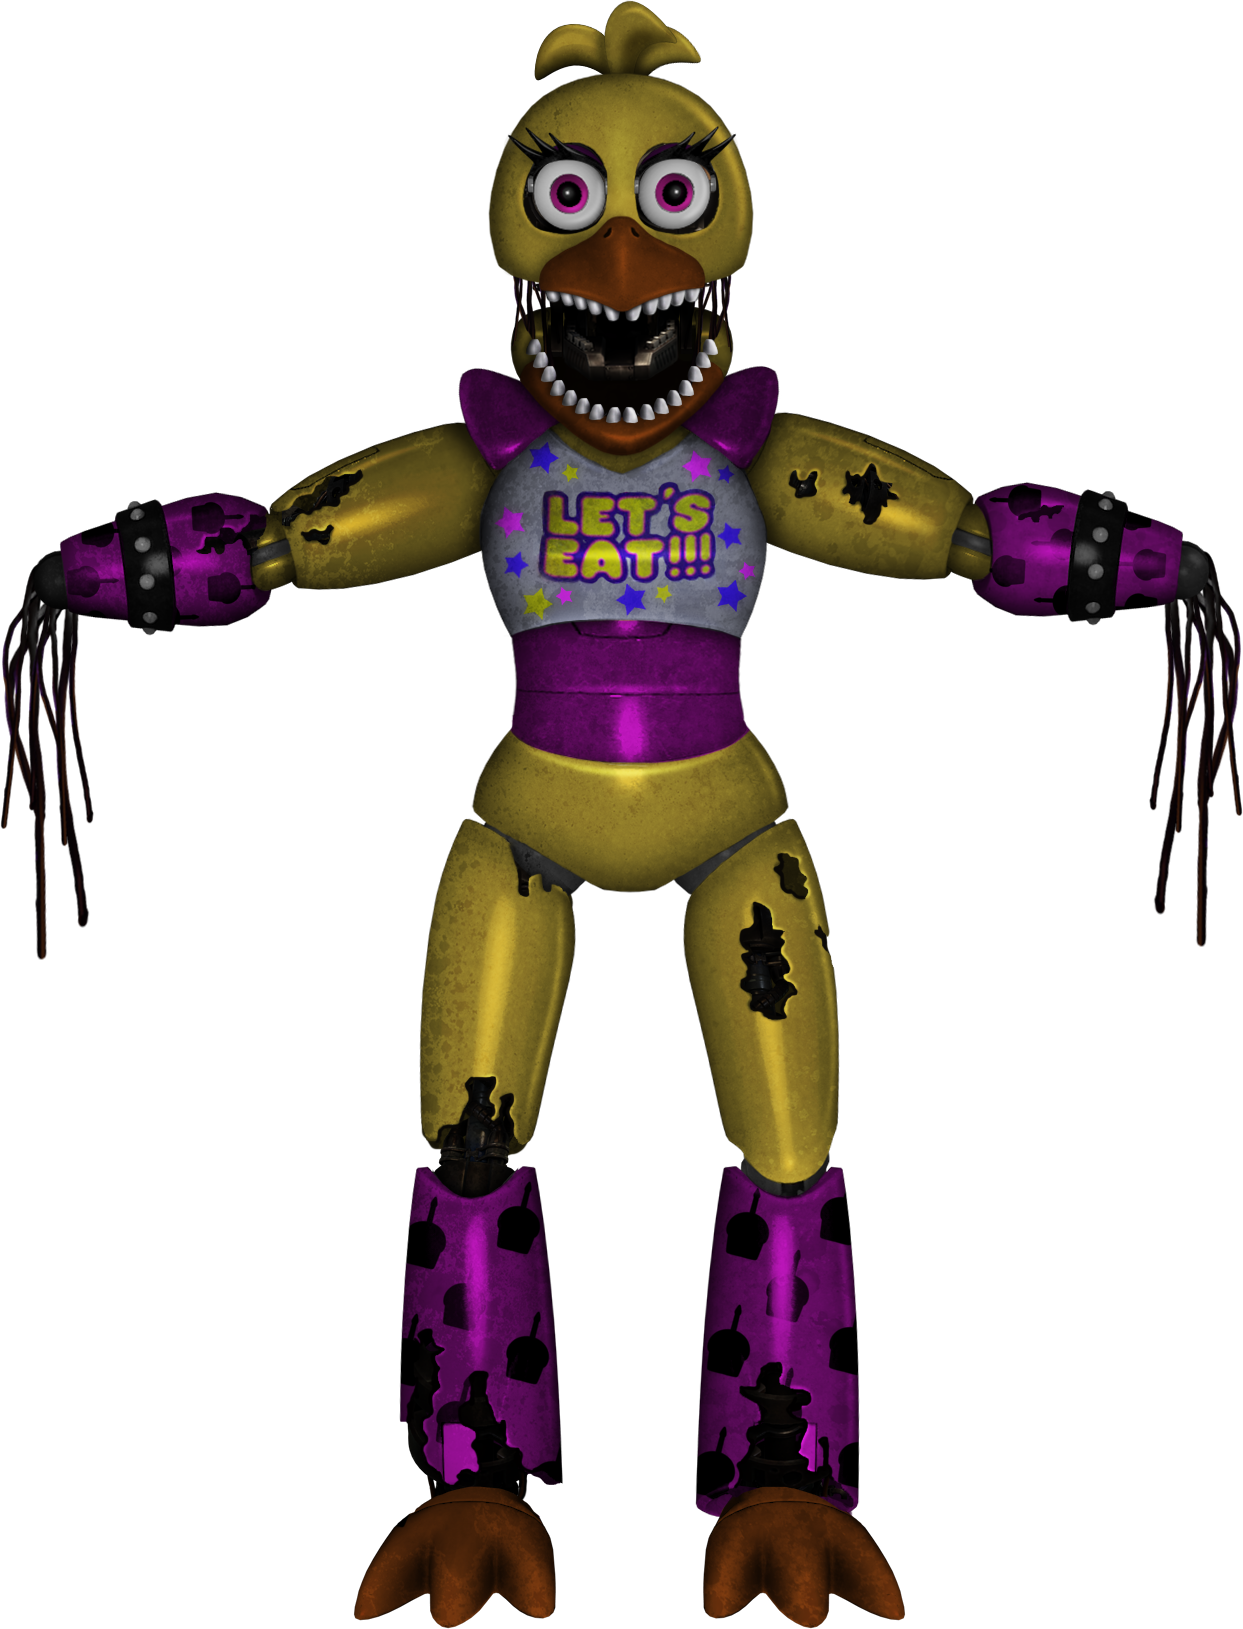 Withered GlamRock Chica fanart by me! (NukaRat) : r/fivenightsatfreddys